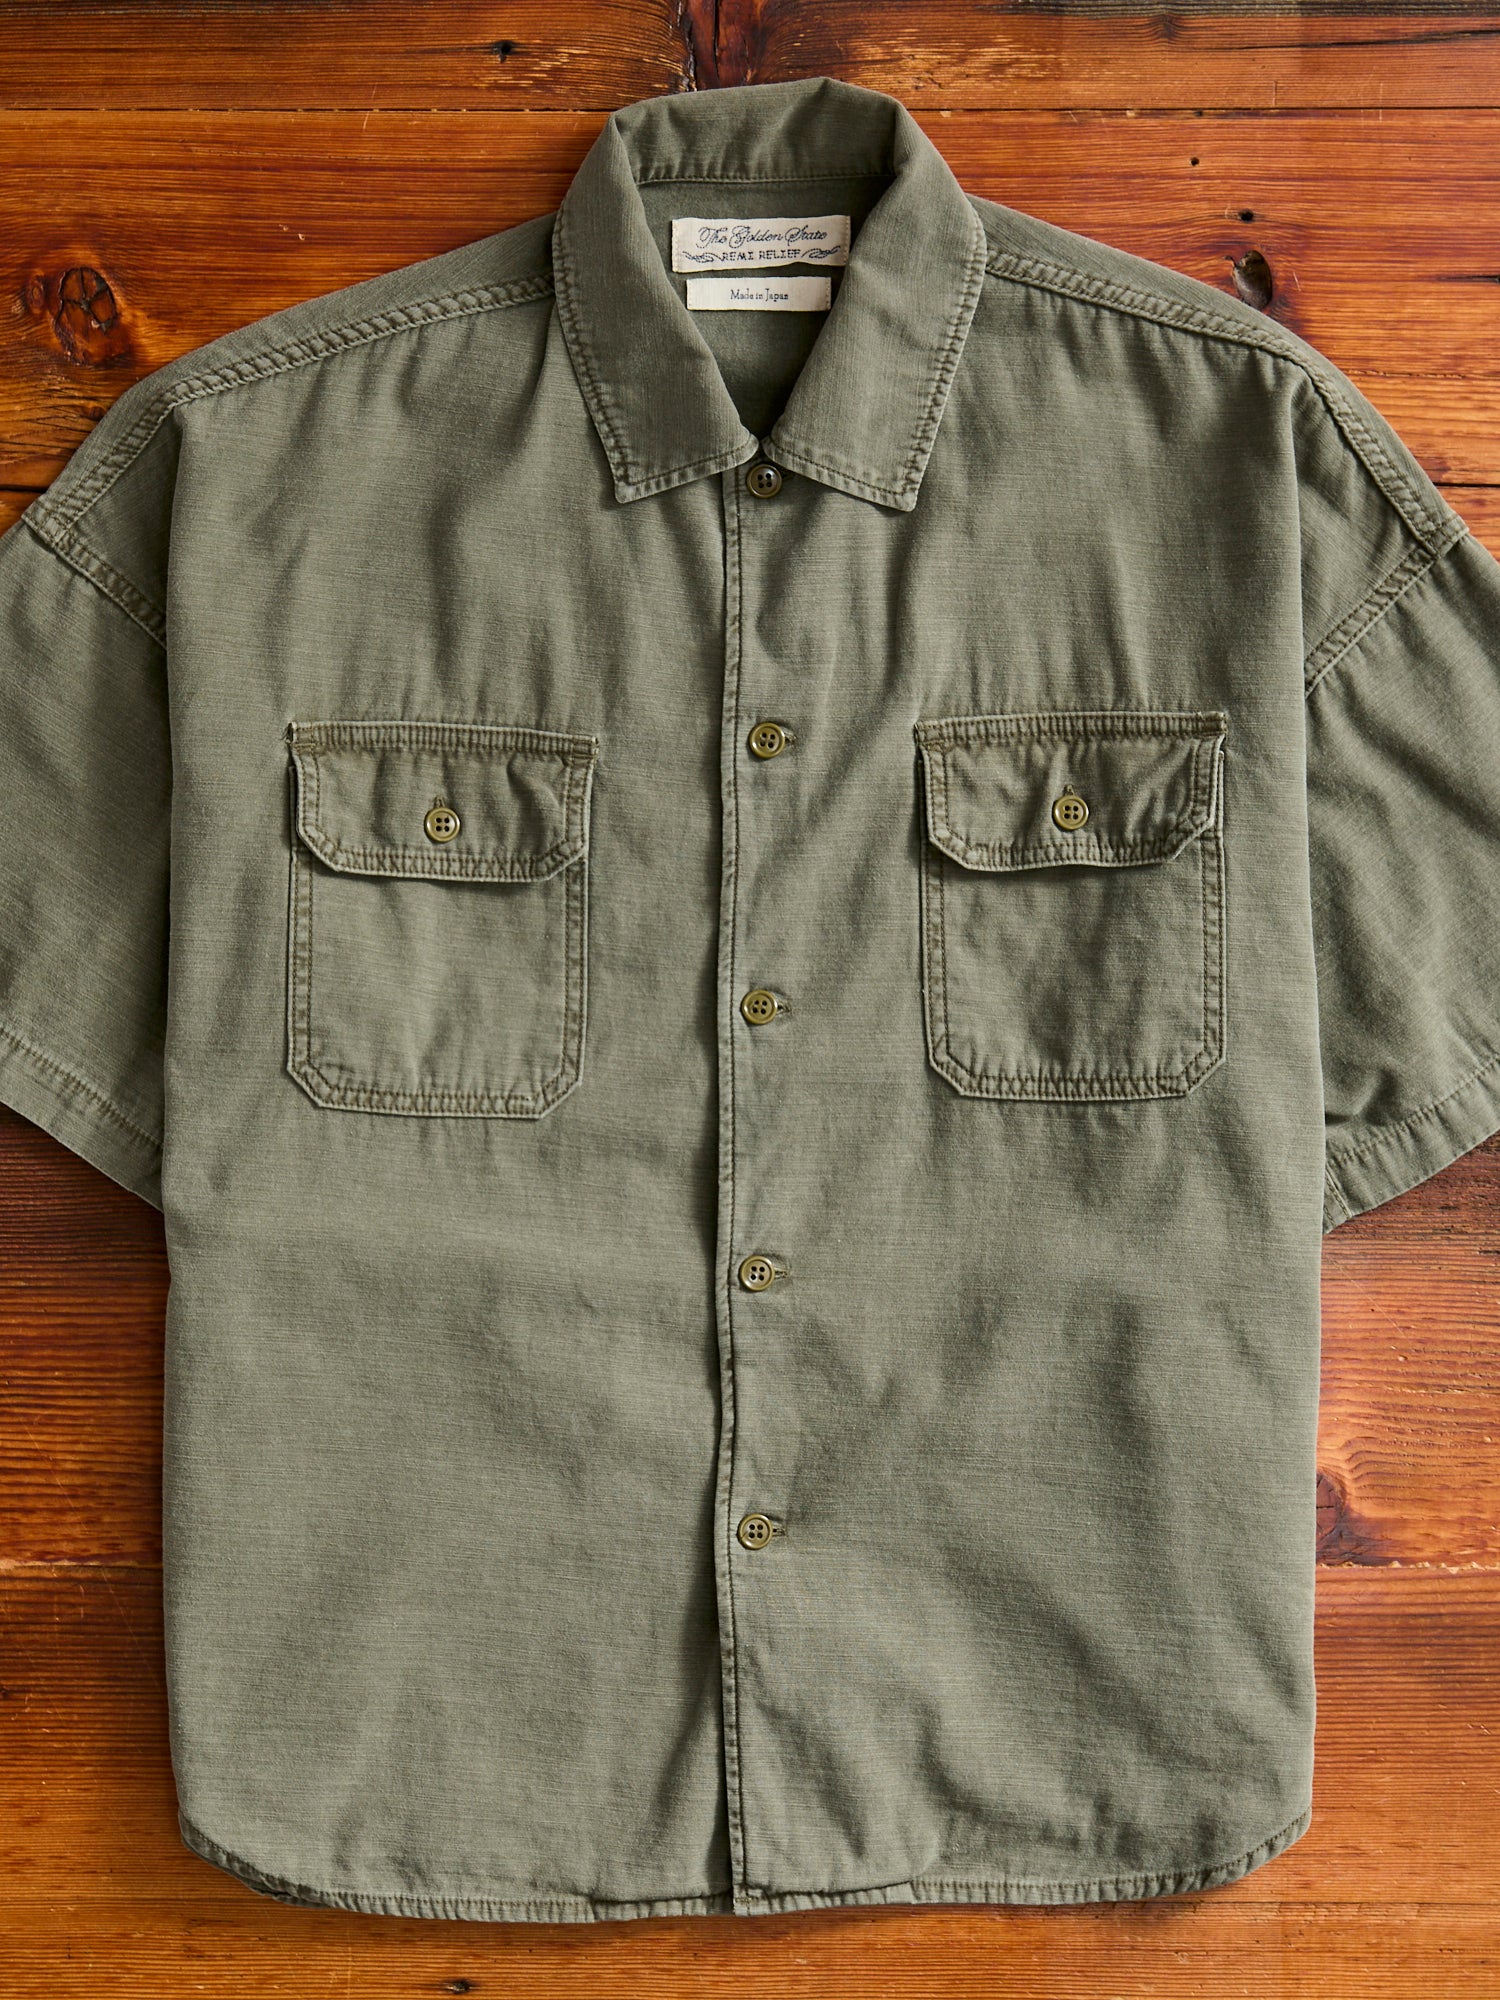 Remi Relief Military Short Sleeve Shirt in Khaki Small